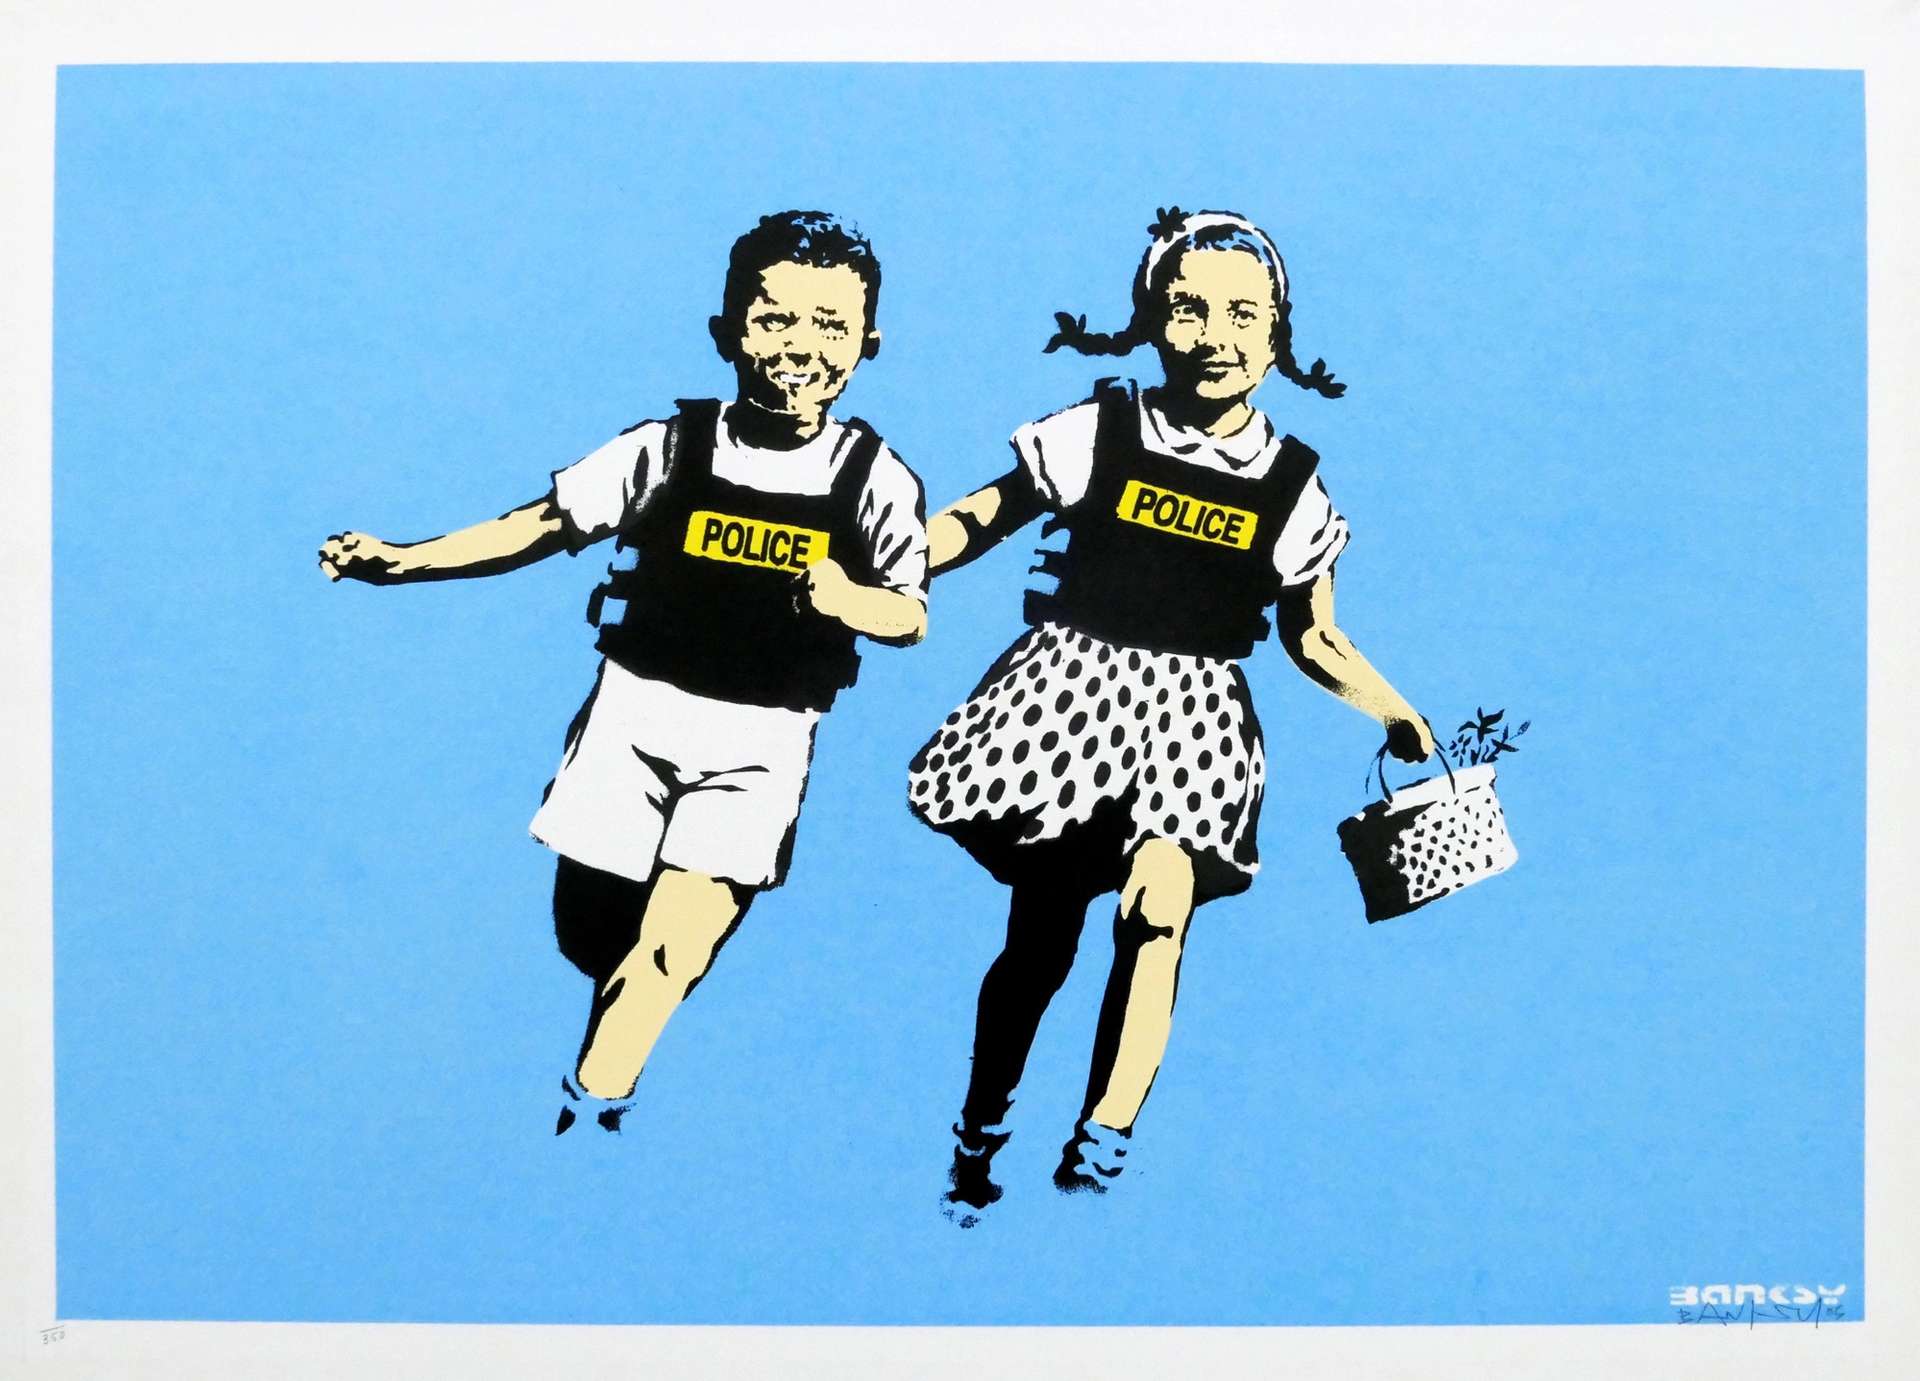 A screenprint by Banksy of two children skipping towards the viewer against a light blue background, both wearing black police vests.